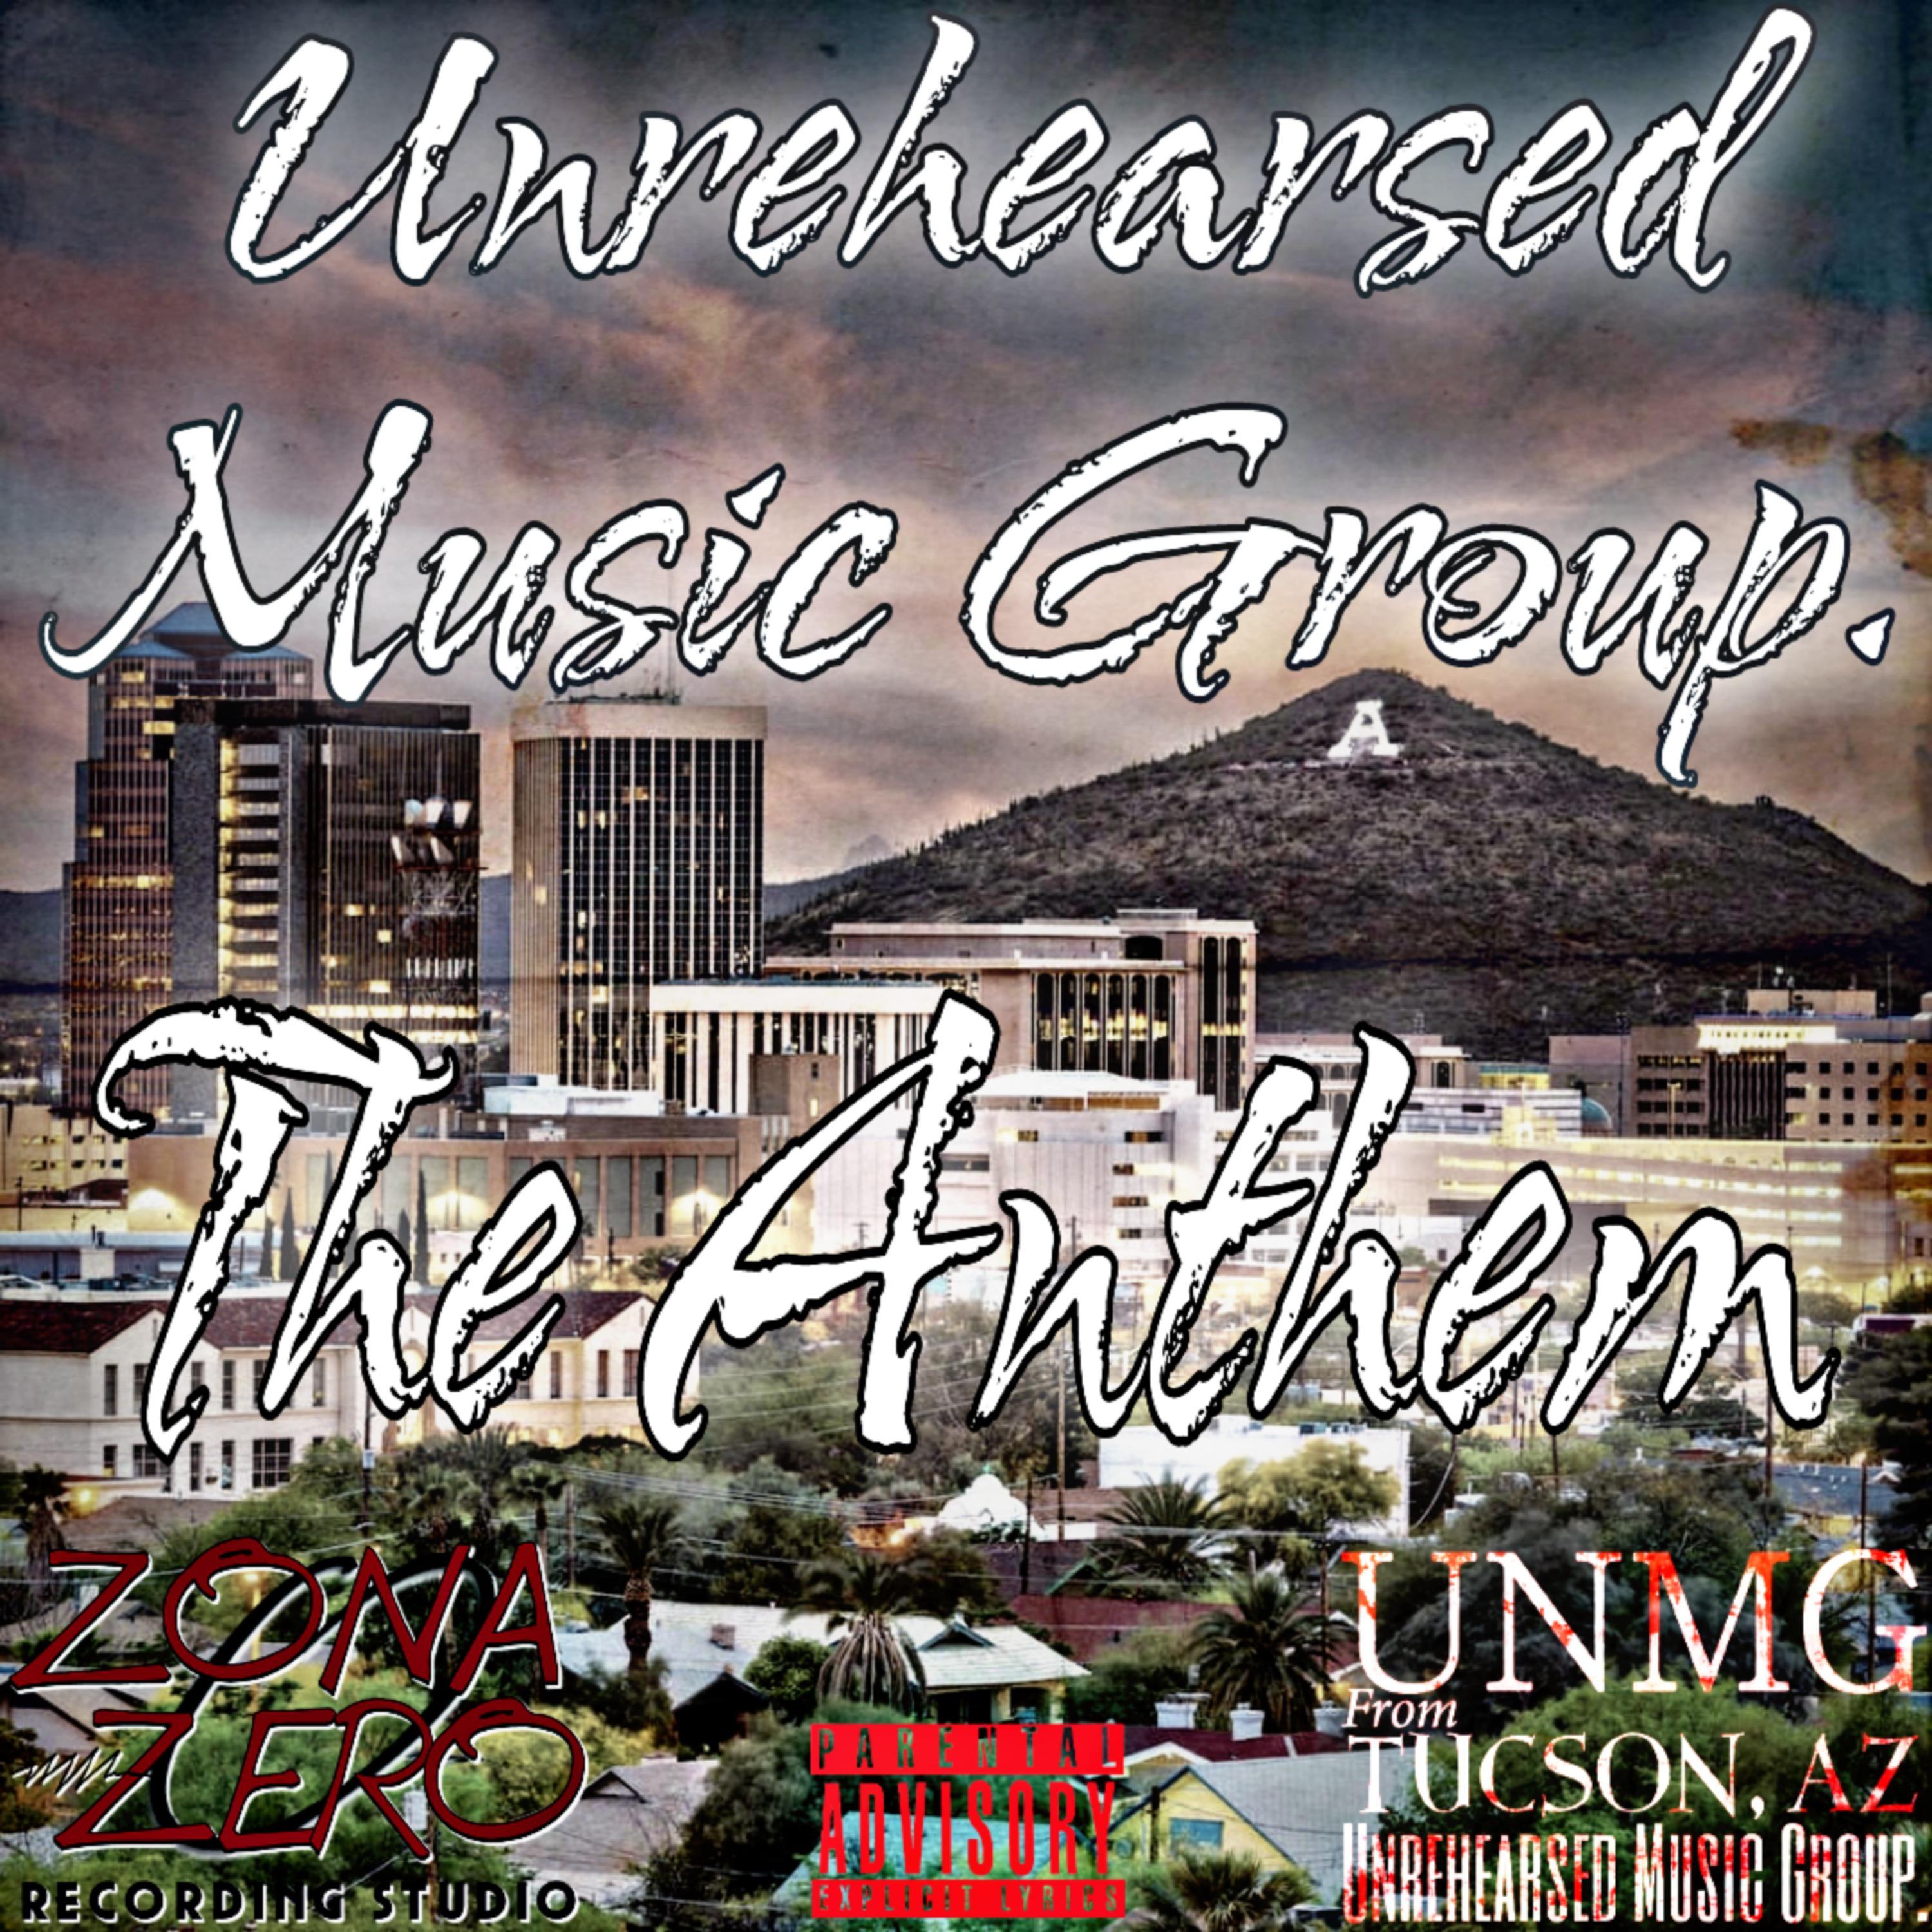 Unrehearsed Music Group - The Anthem